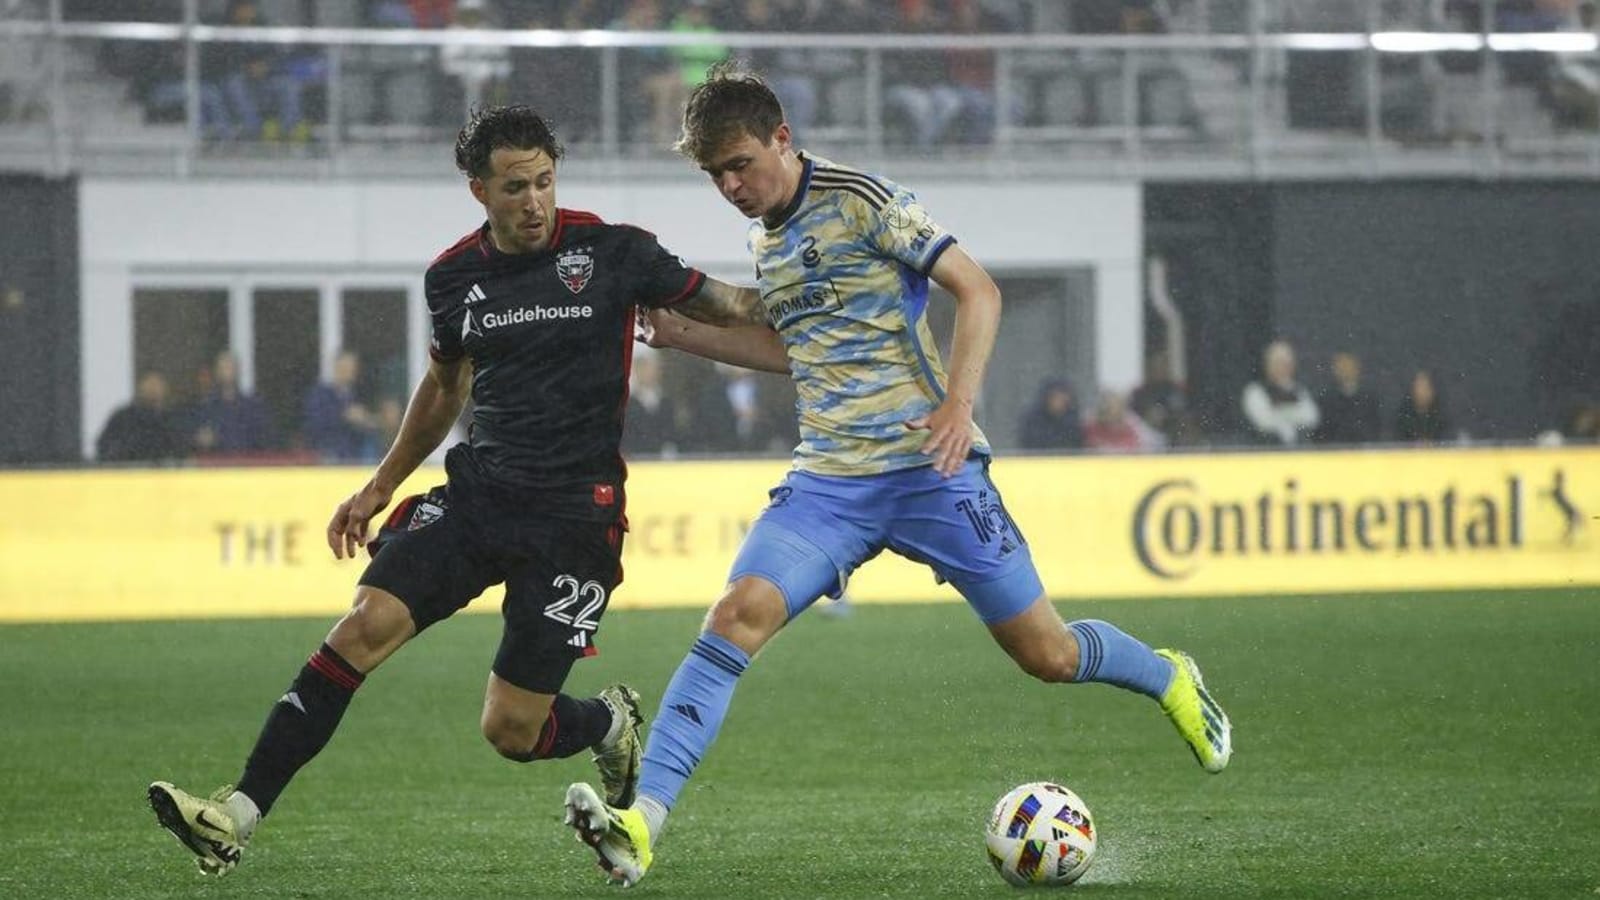 Union earn dramatic draw with D.C. United